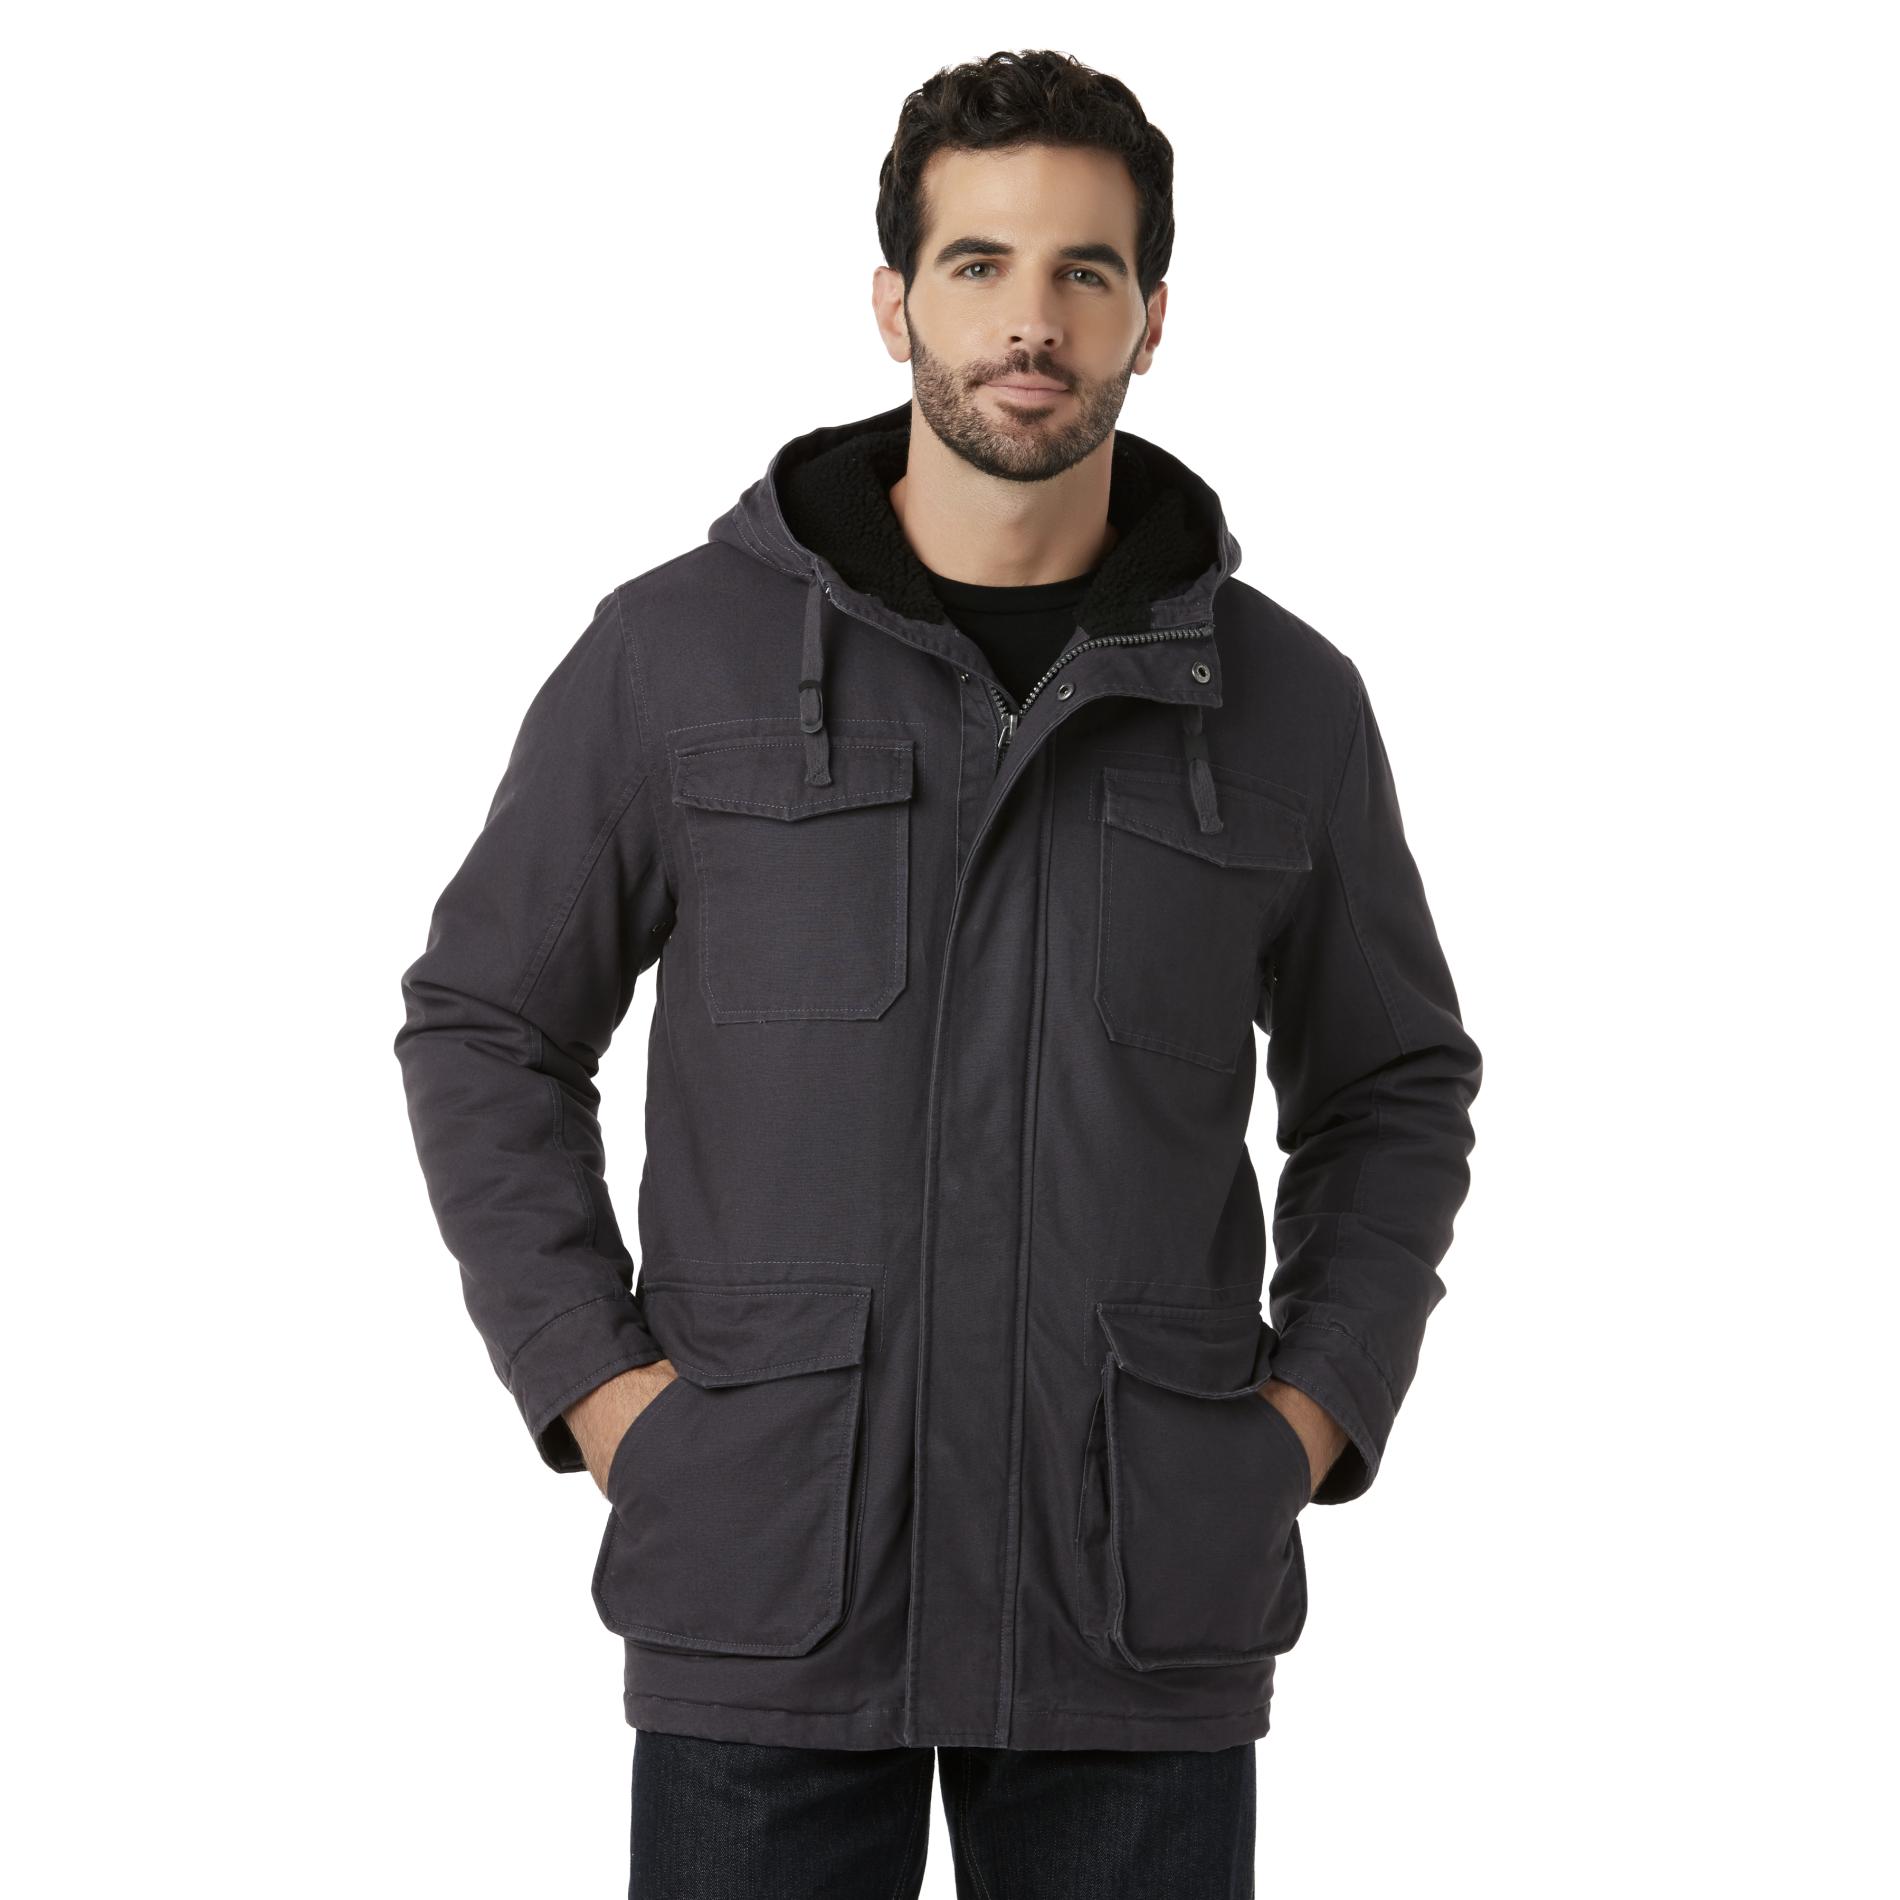 Outdoor Life Men's Hooded Jacket | Shop Your Way: Online Shopping ...